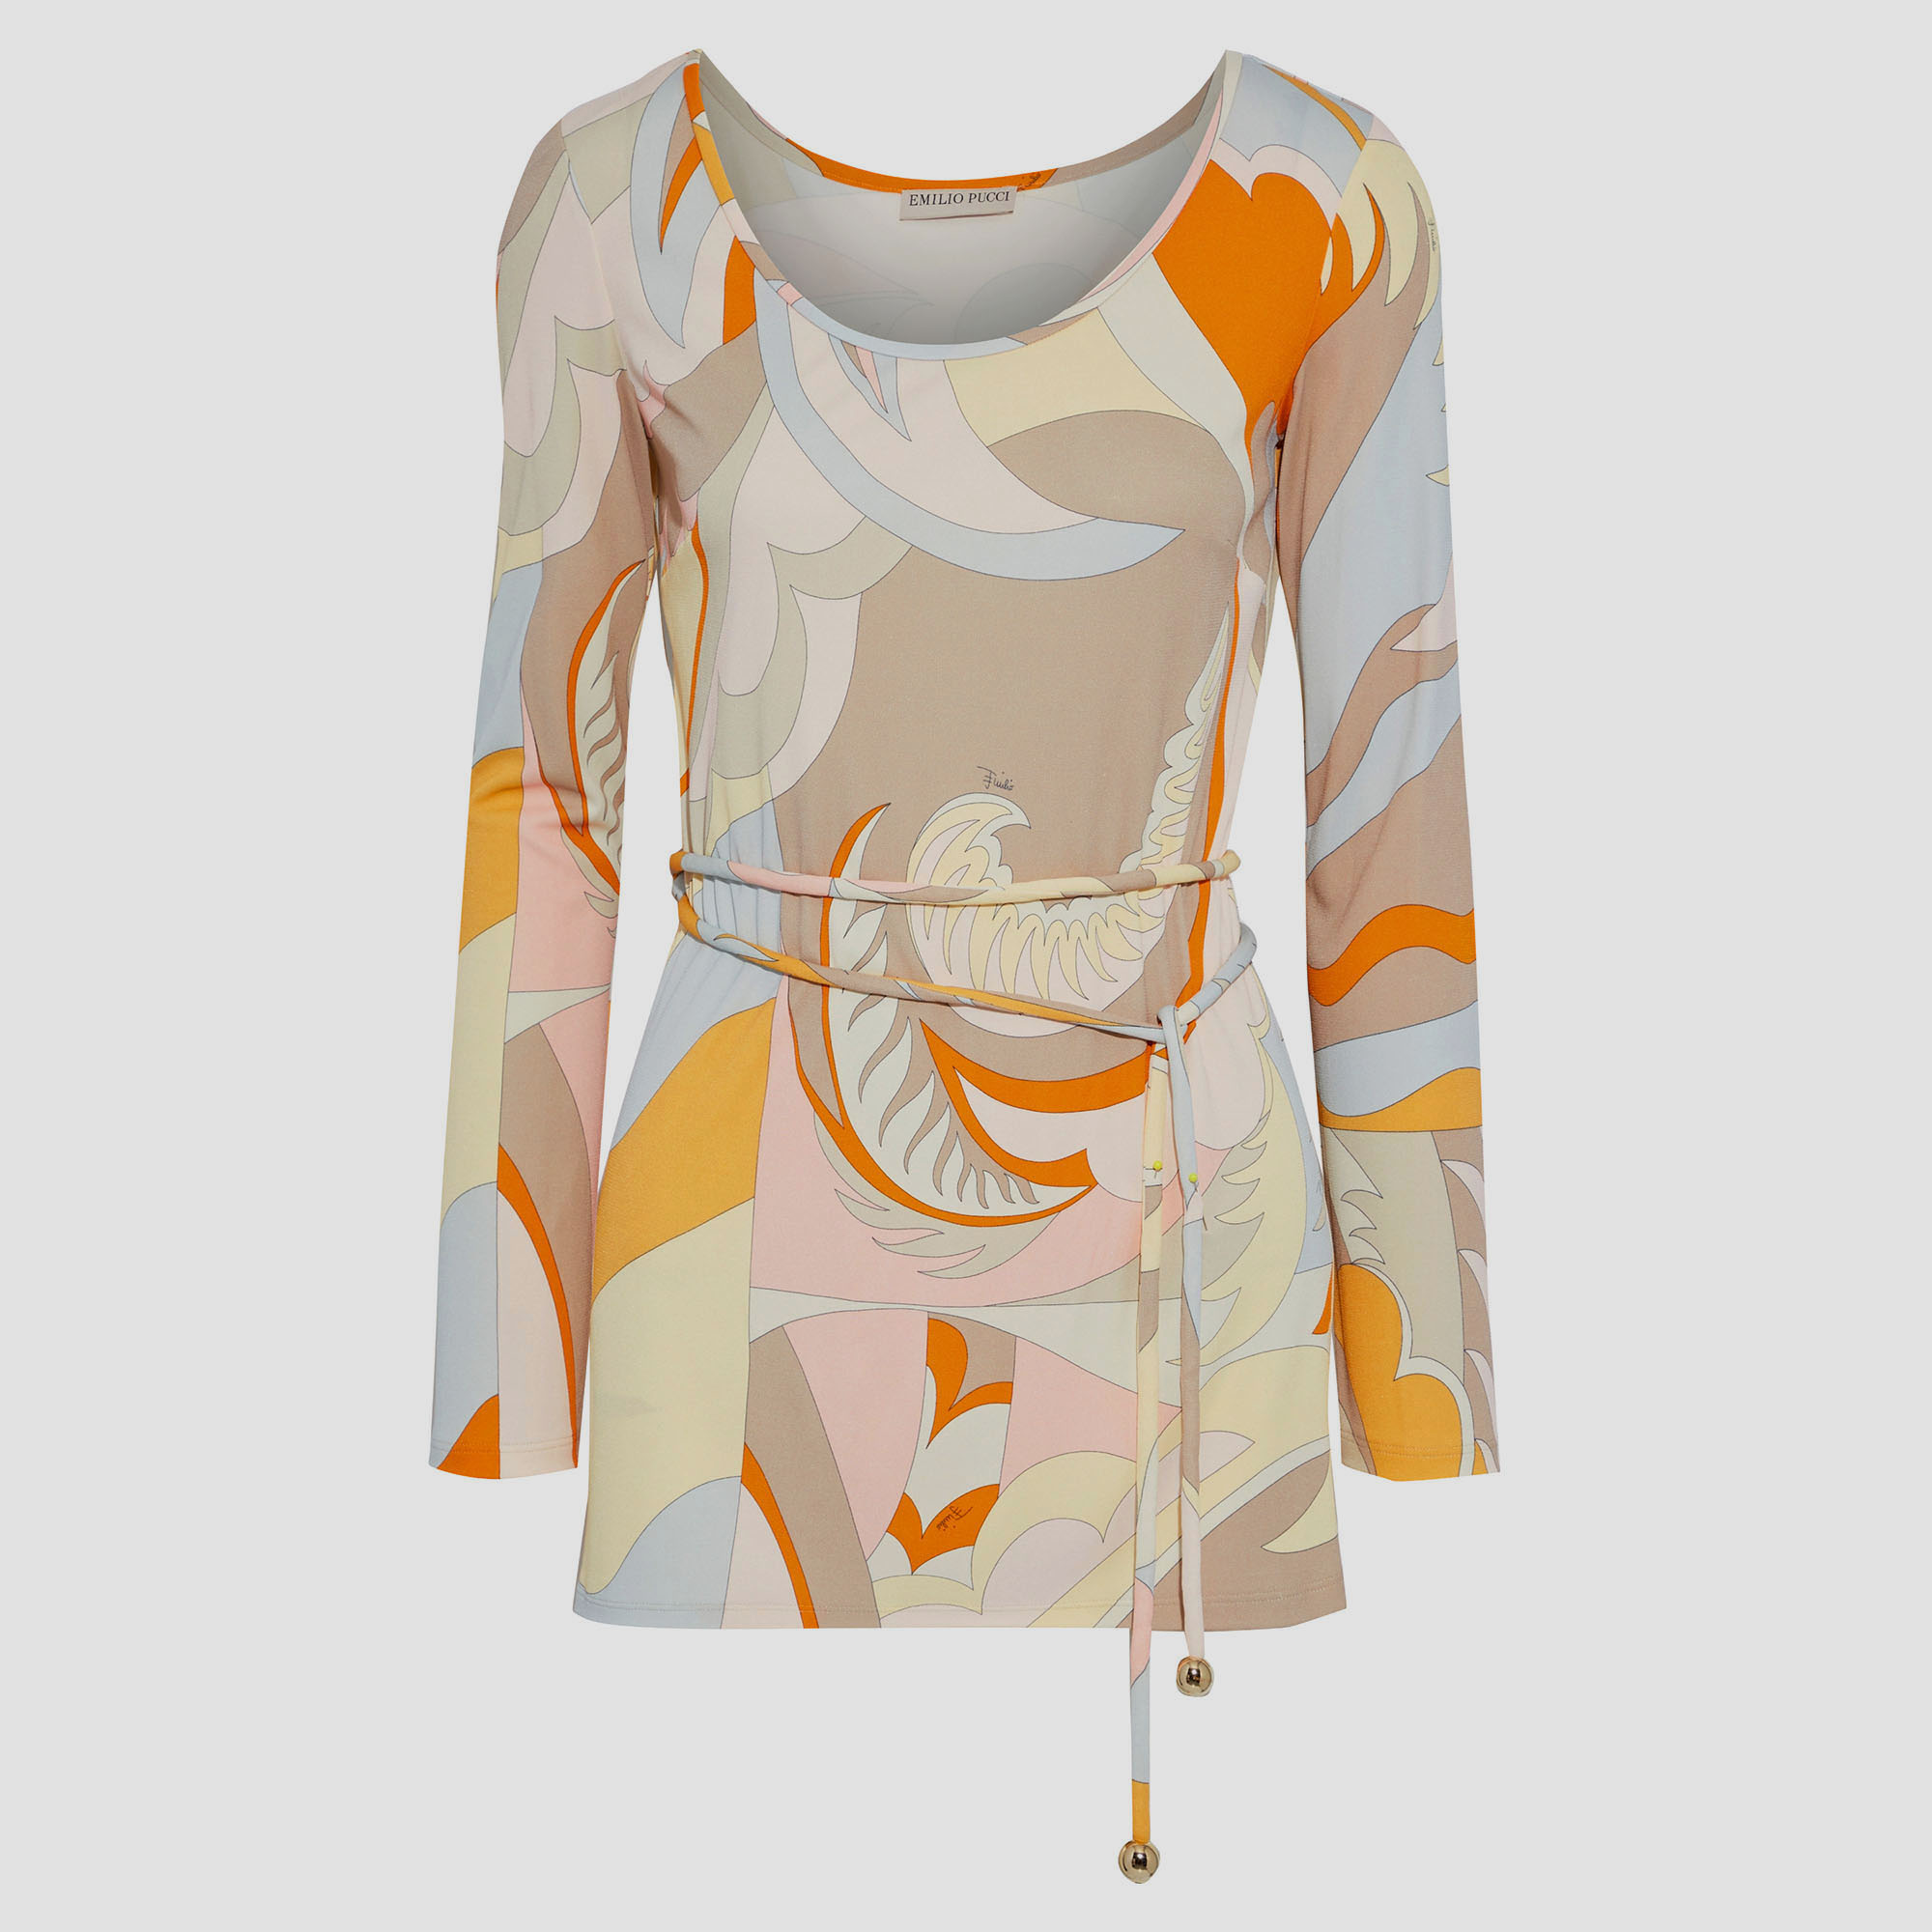 Emilio pucci viscose long sleeved top 48